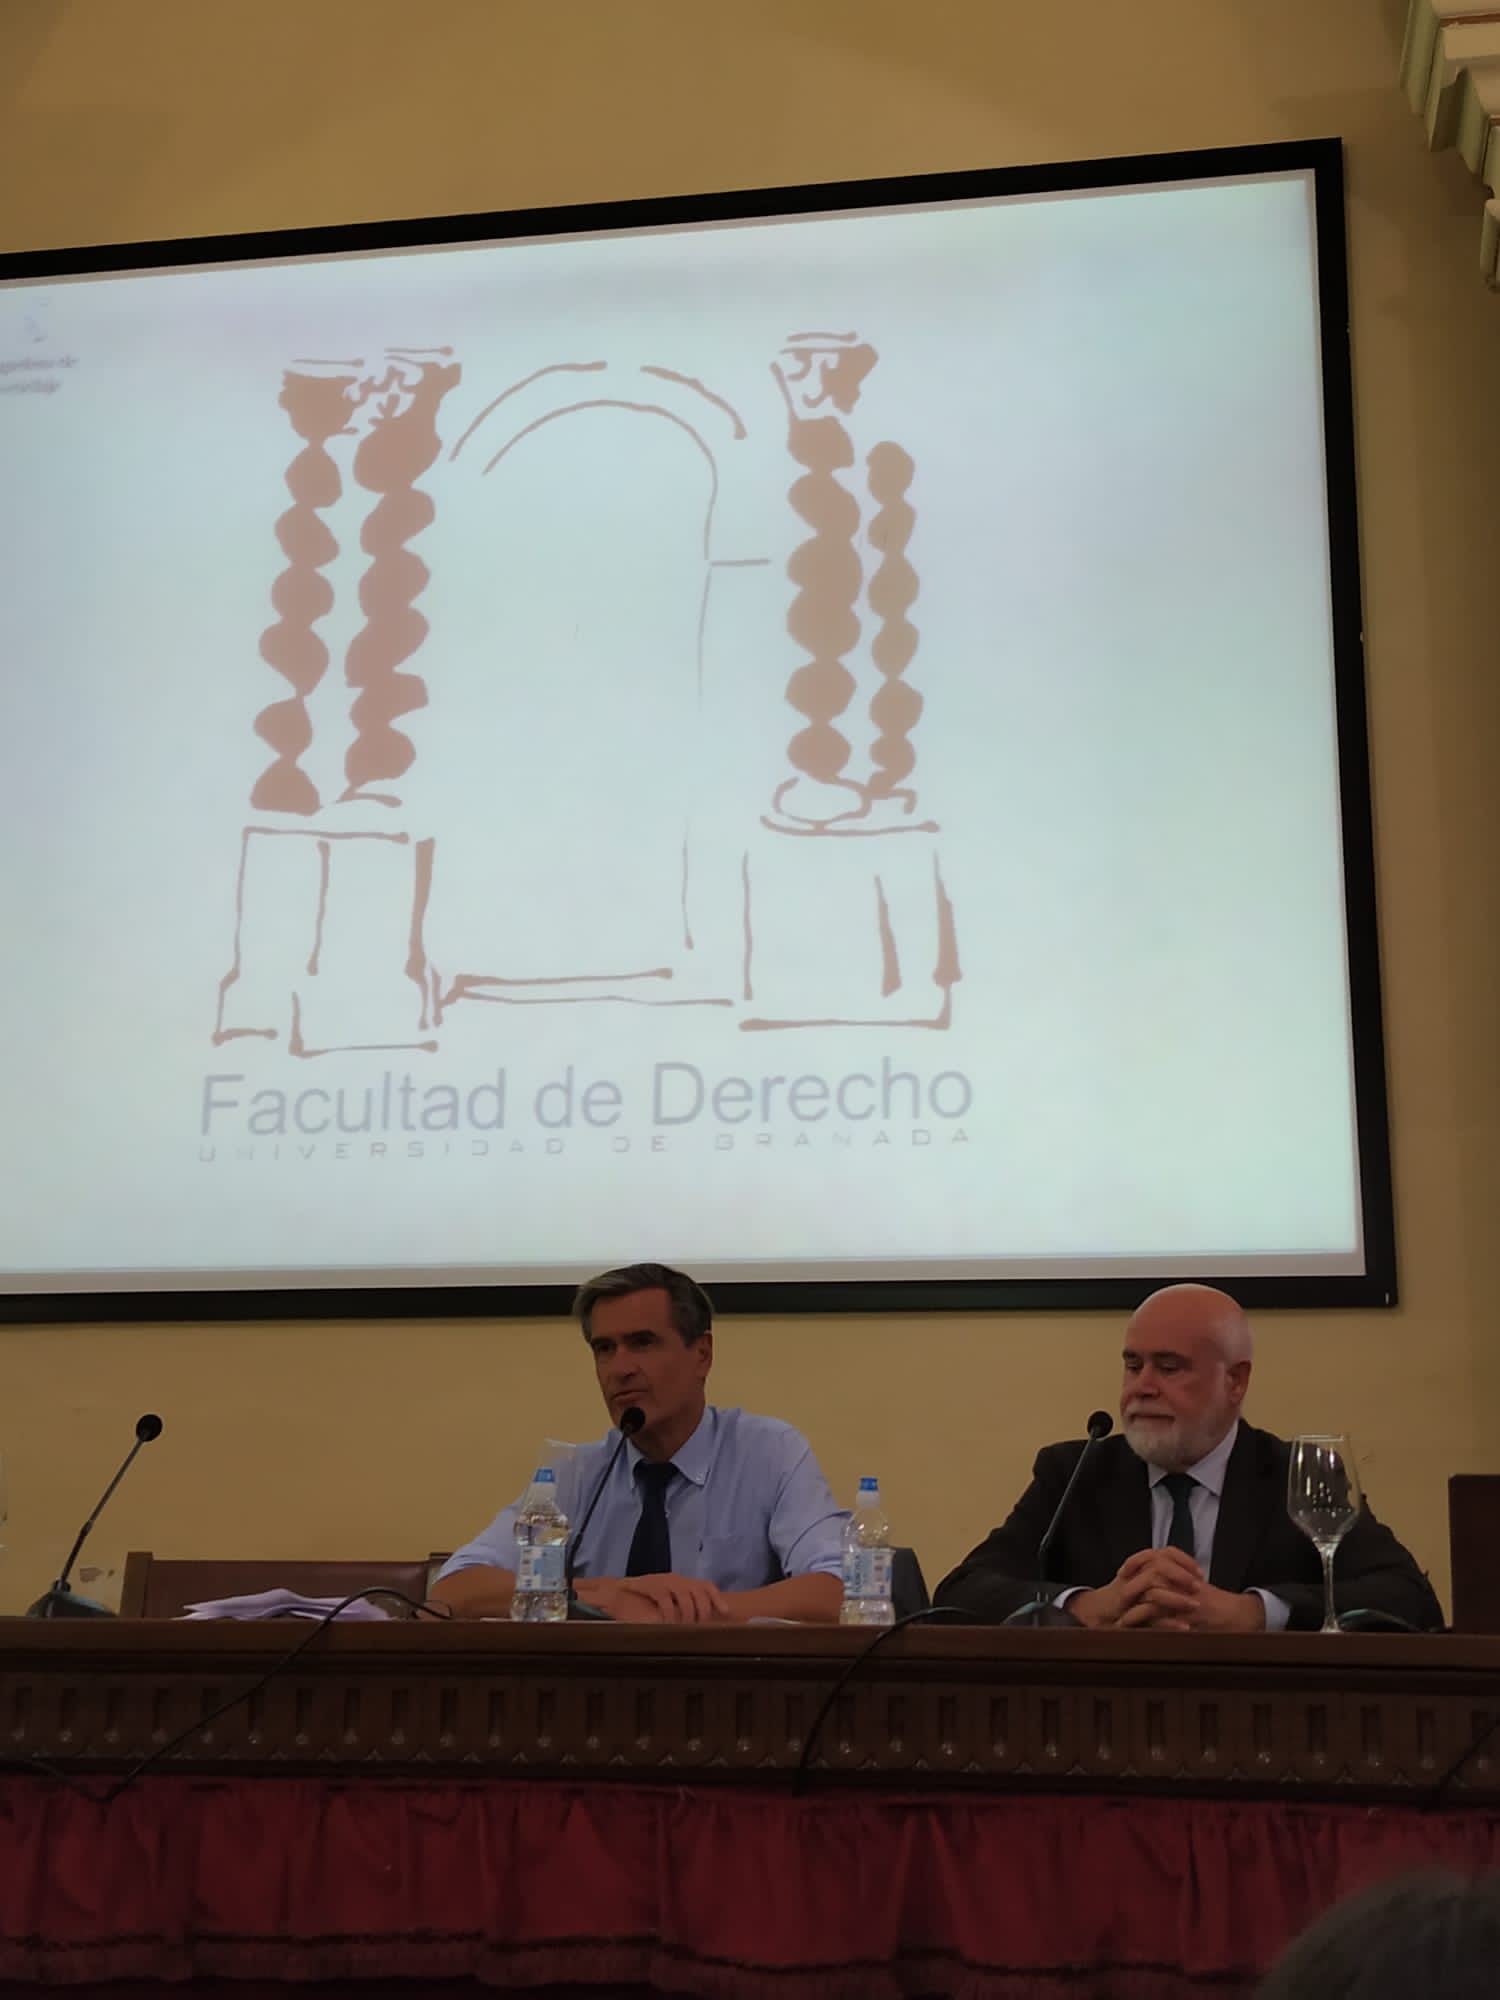 Image in which you can see Professor López Aguilar making an intervention at the conference